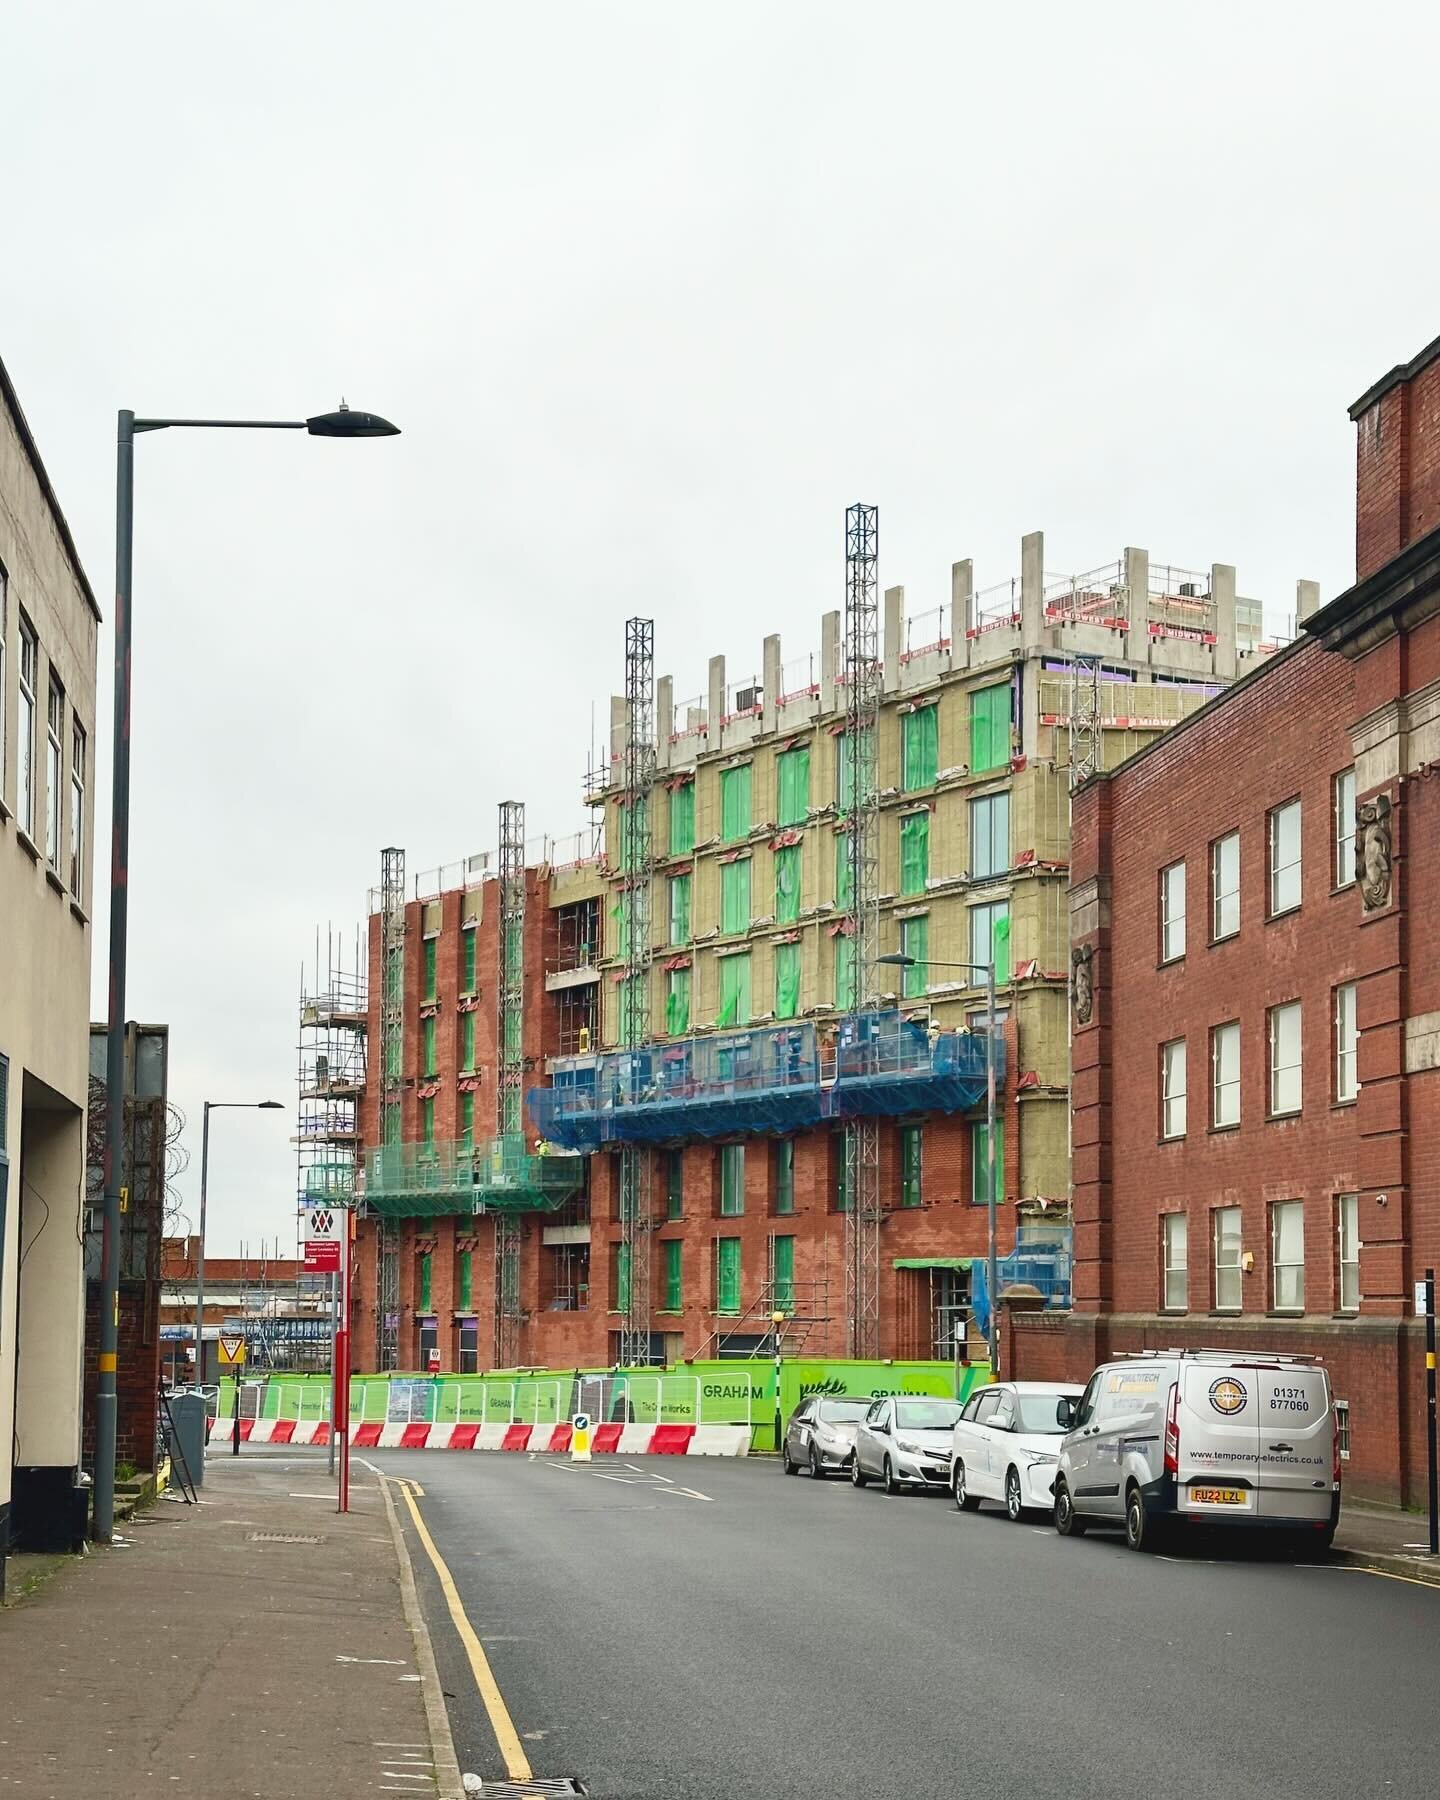 Great to see progress on our Hanley Street site! Designed by Claridge Architects to provide over 200 build-to-rent apartments in Birmingham. 

Really looking forward to seeing this one come into fruition.